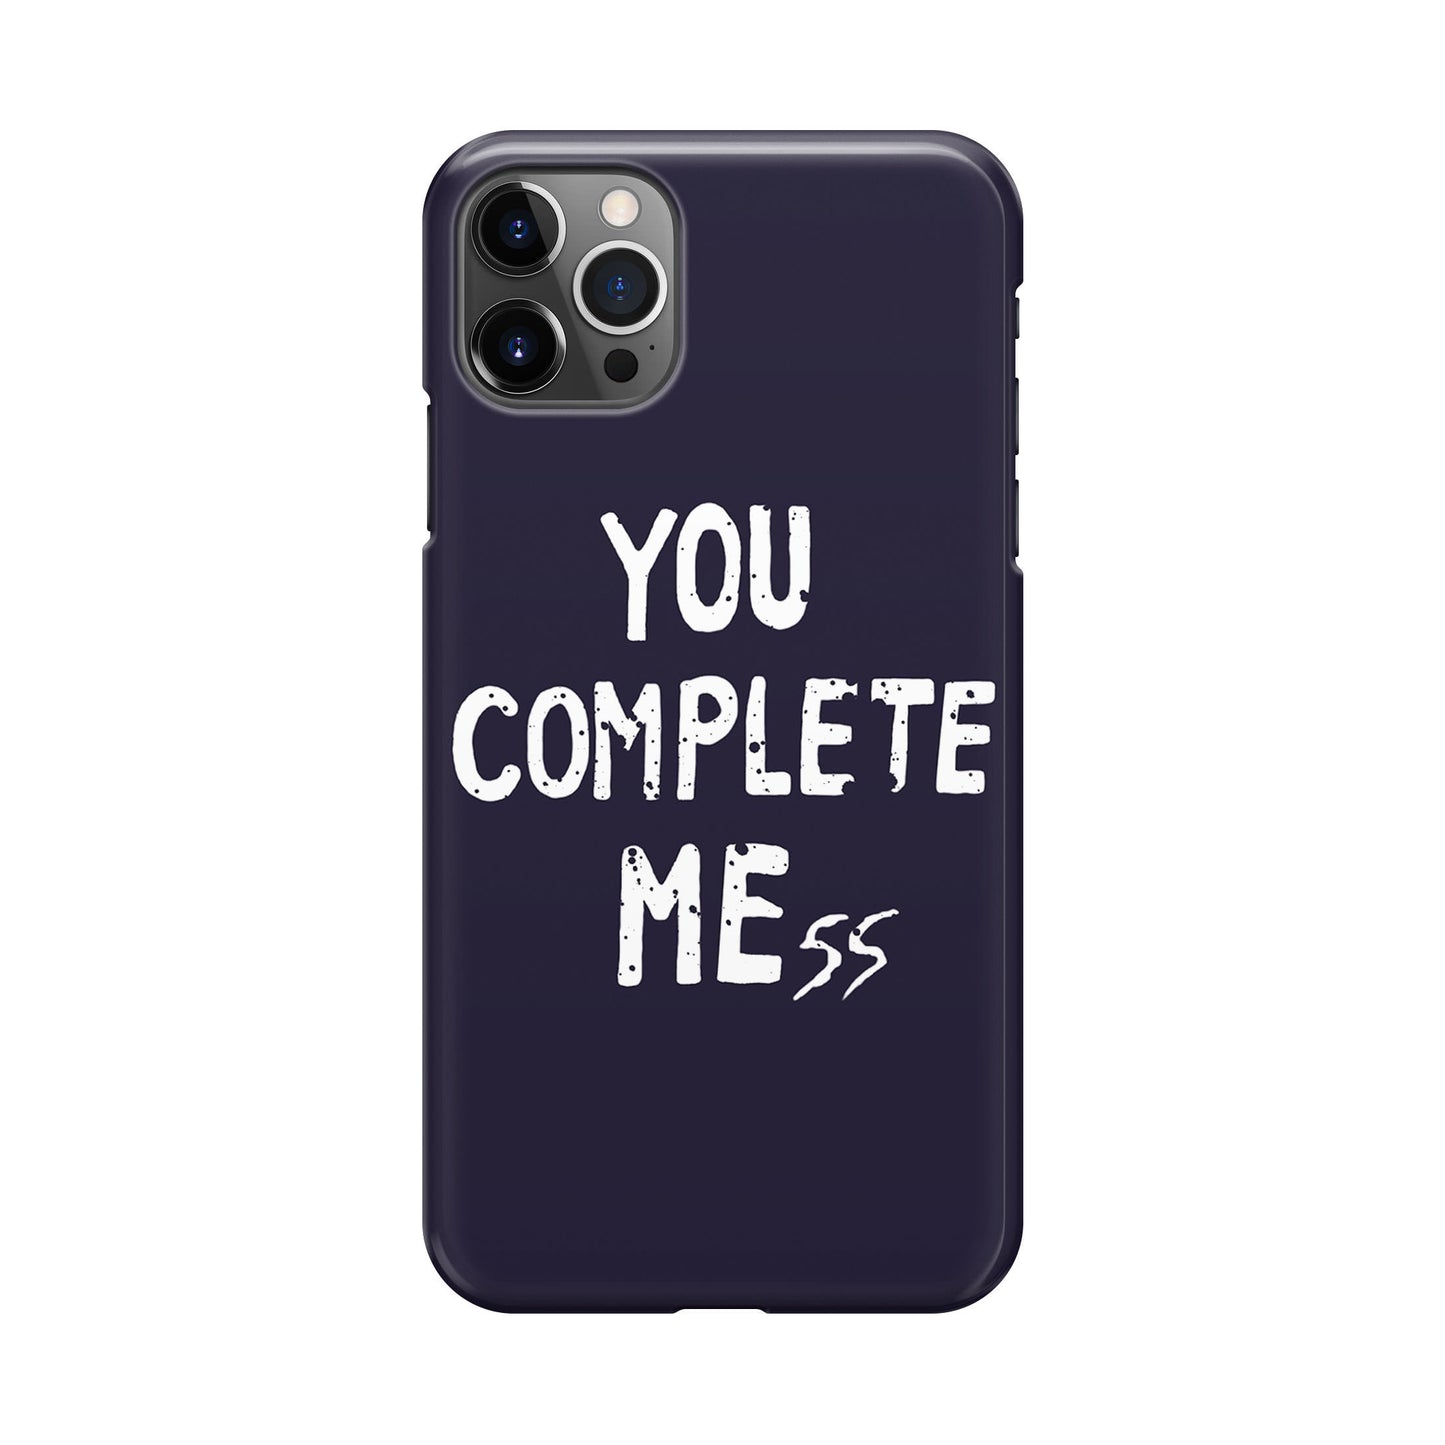 You Complete Me iPhone 12 Pro Max Case